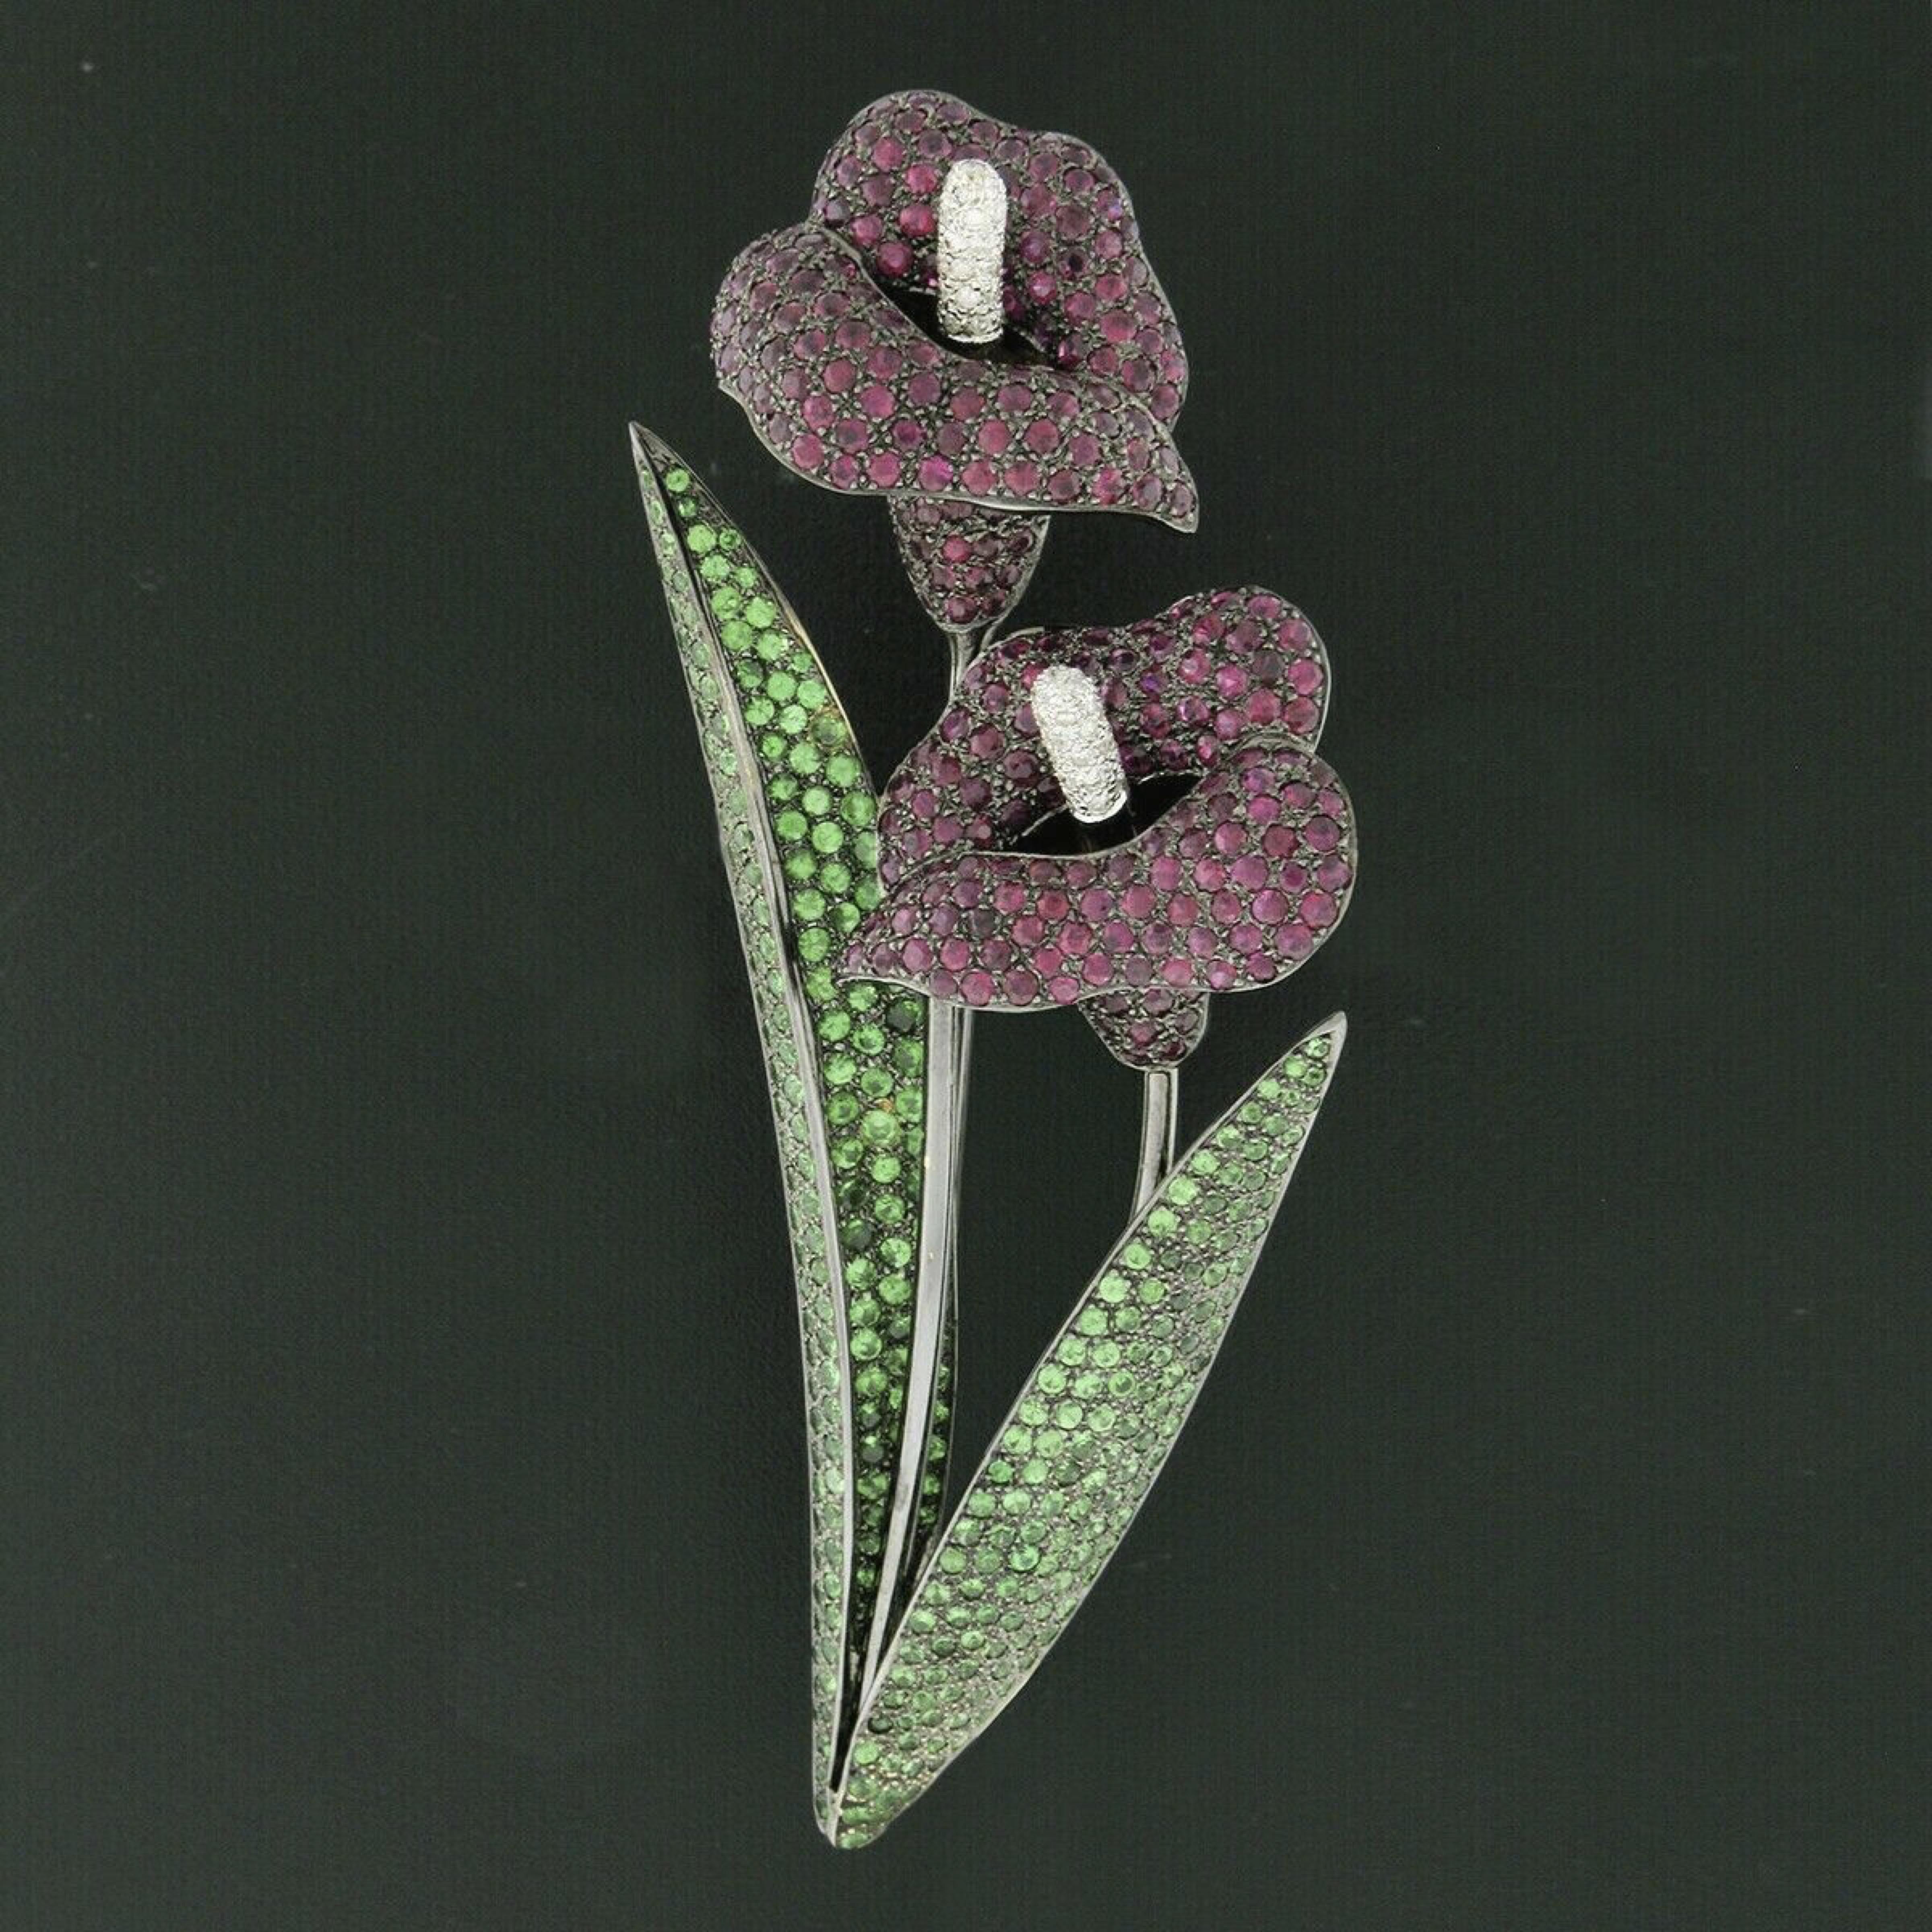 Here we have a large vintage brooch that was crafted from solid 18k white gold with black rhodium top. This large brooch features dual calla lily flower design that is set with over 18 carats of truly pavé set round cut gemstones and diamonds. There